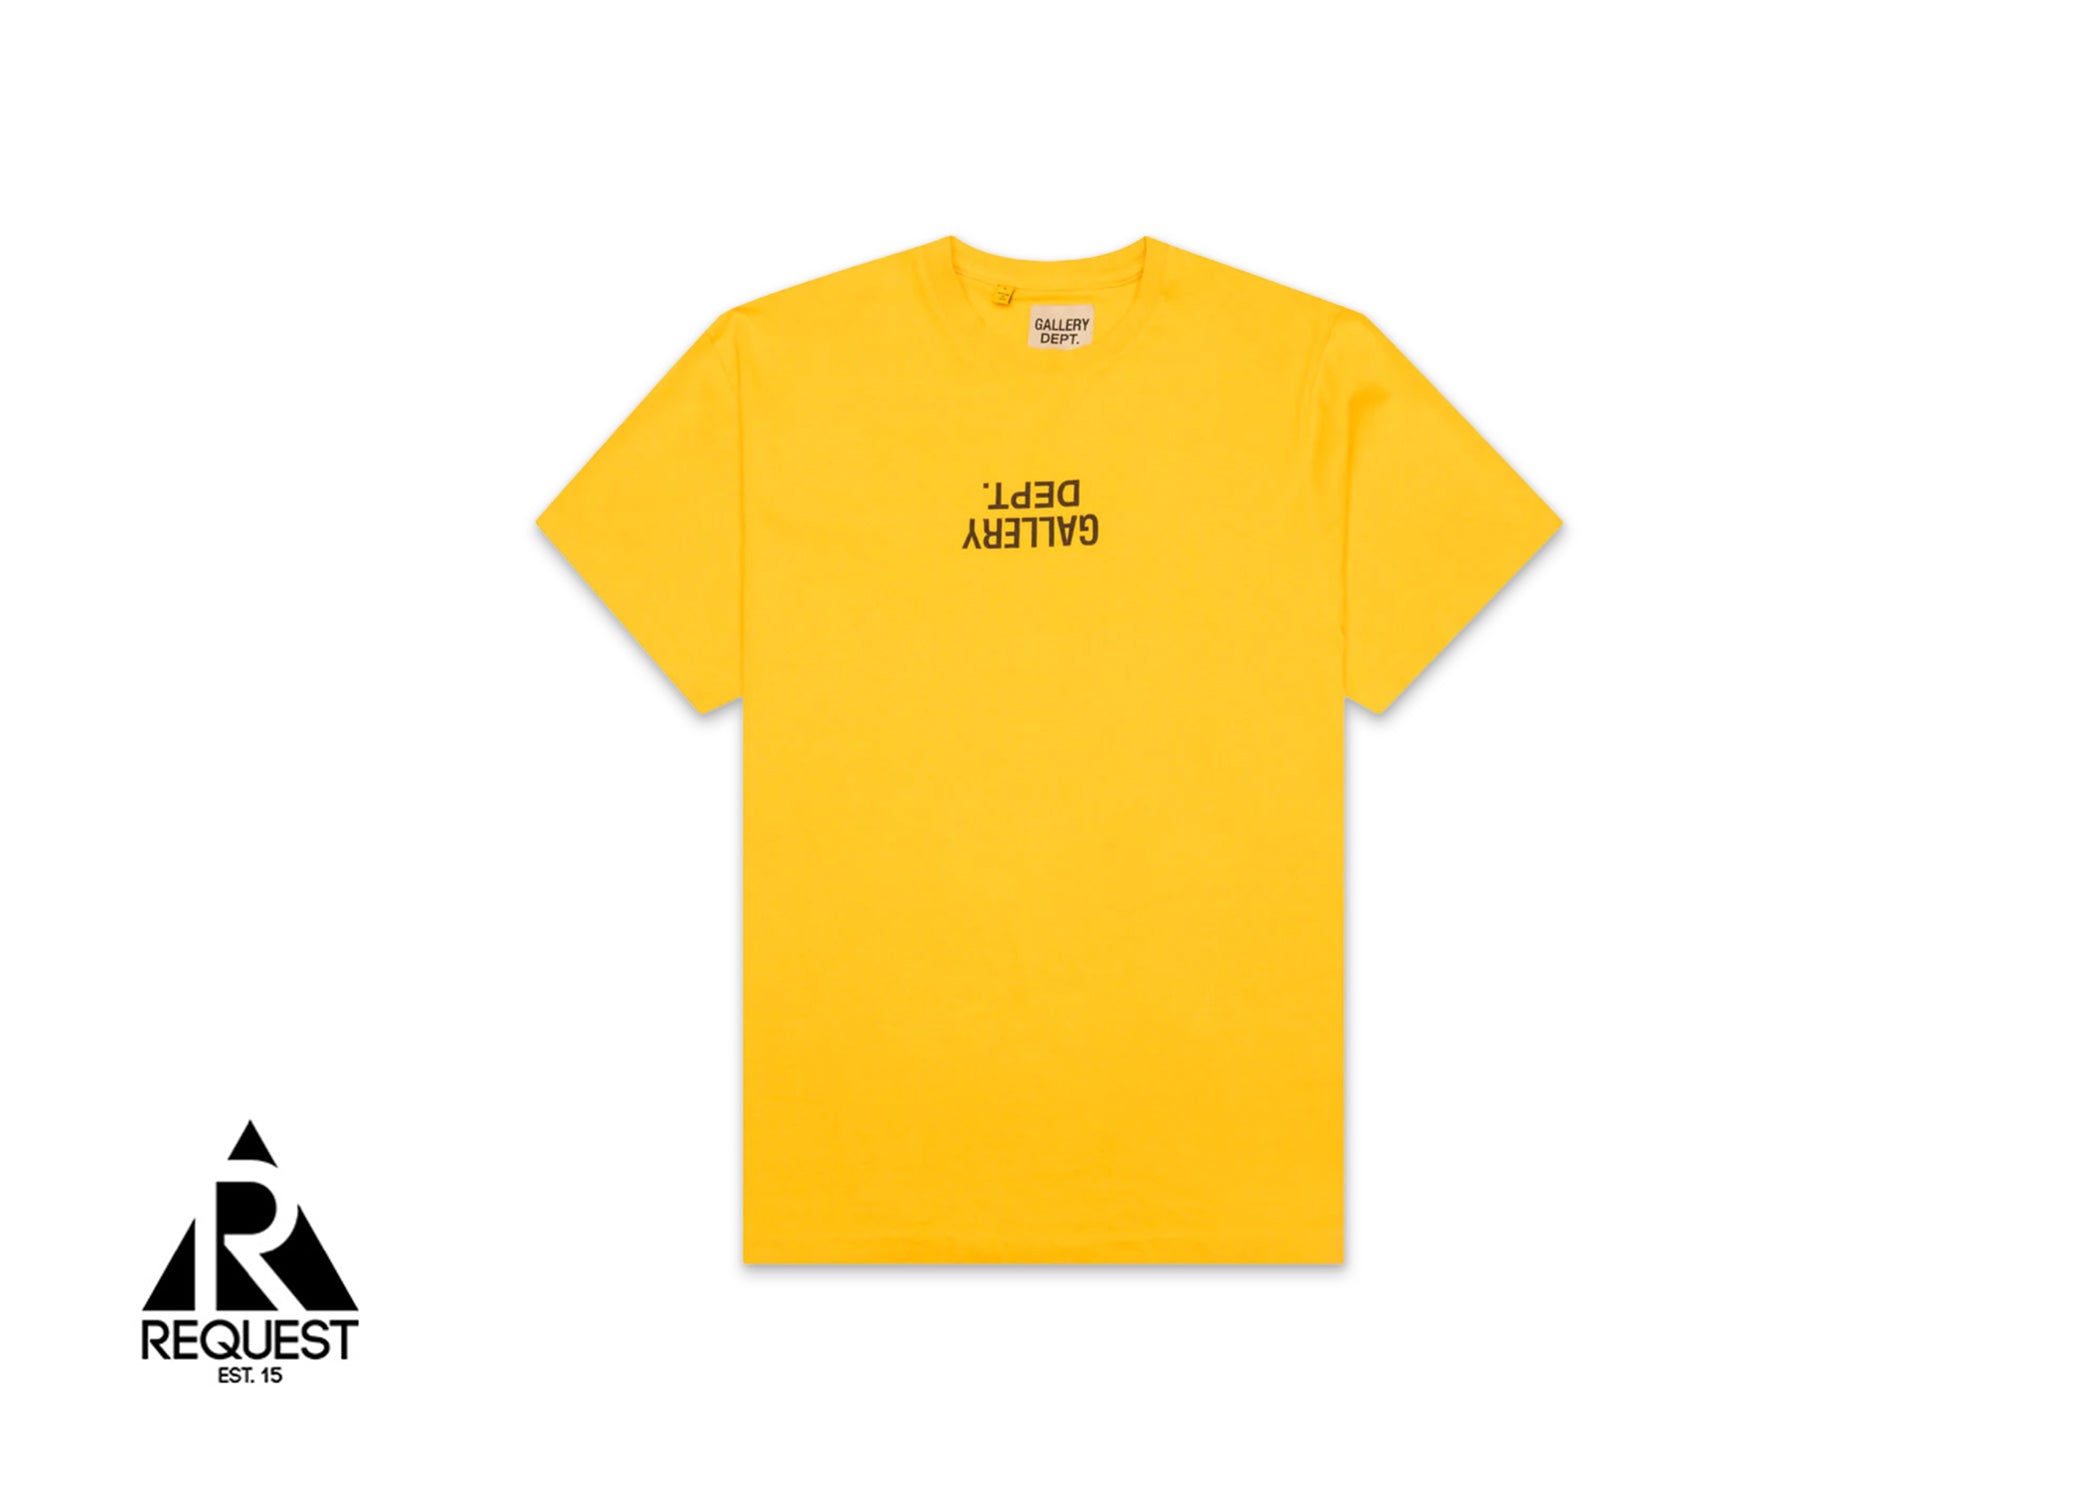 Gallery Dept. F*cked Up Logo Tee "Gold"